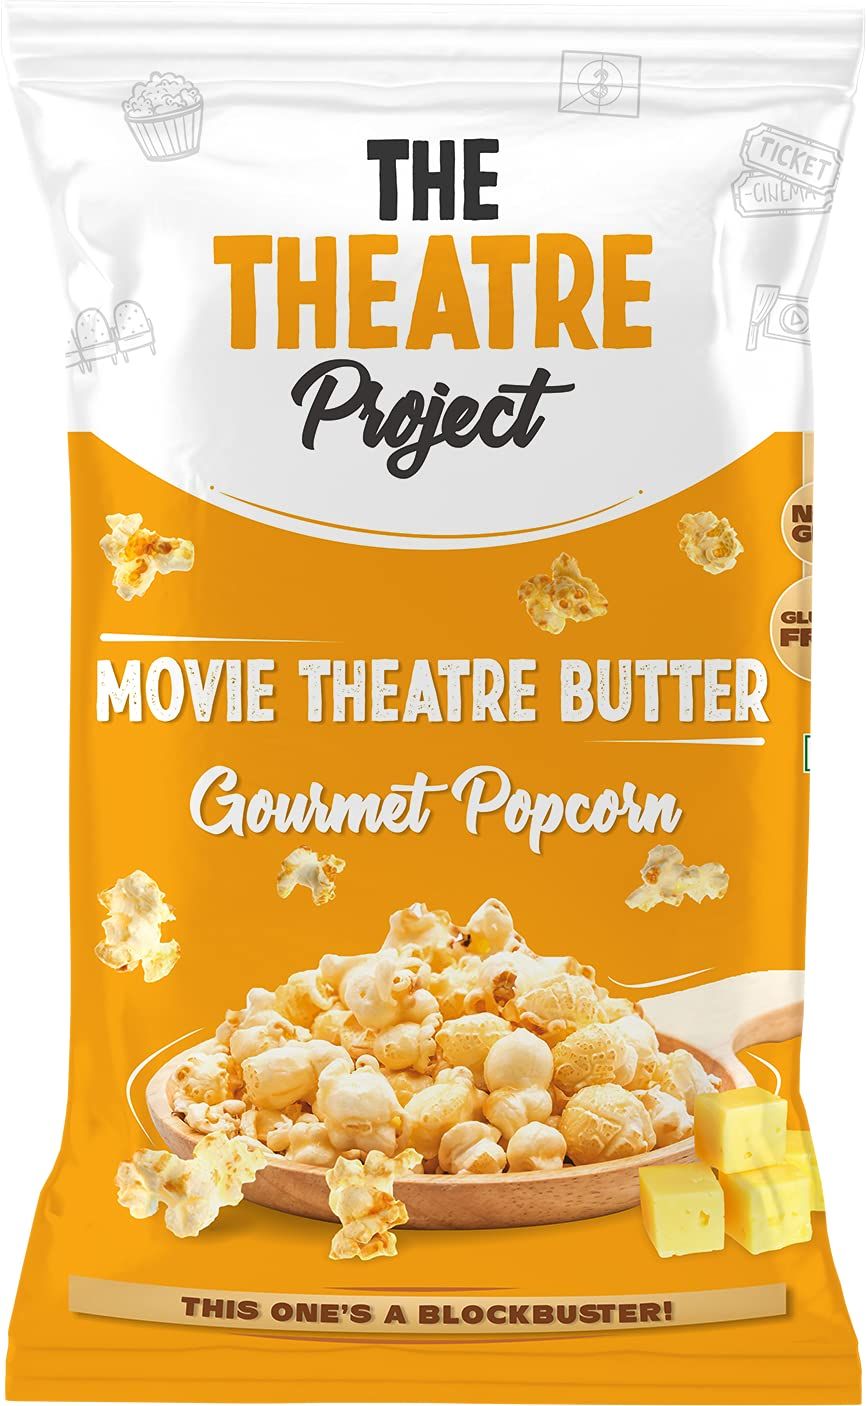 The Theatre Project Popcorn Movie Butter Flavor Image